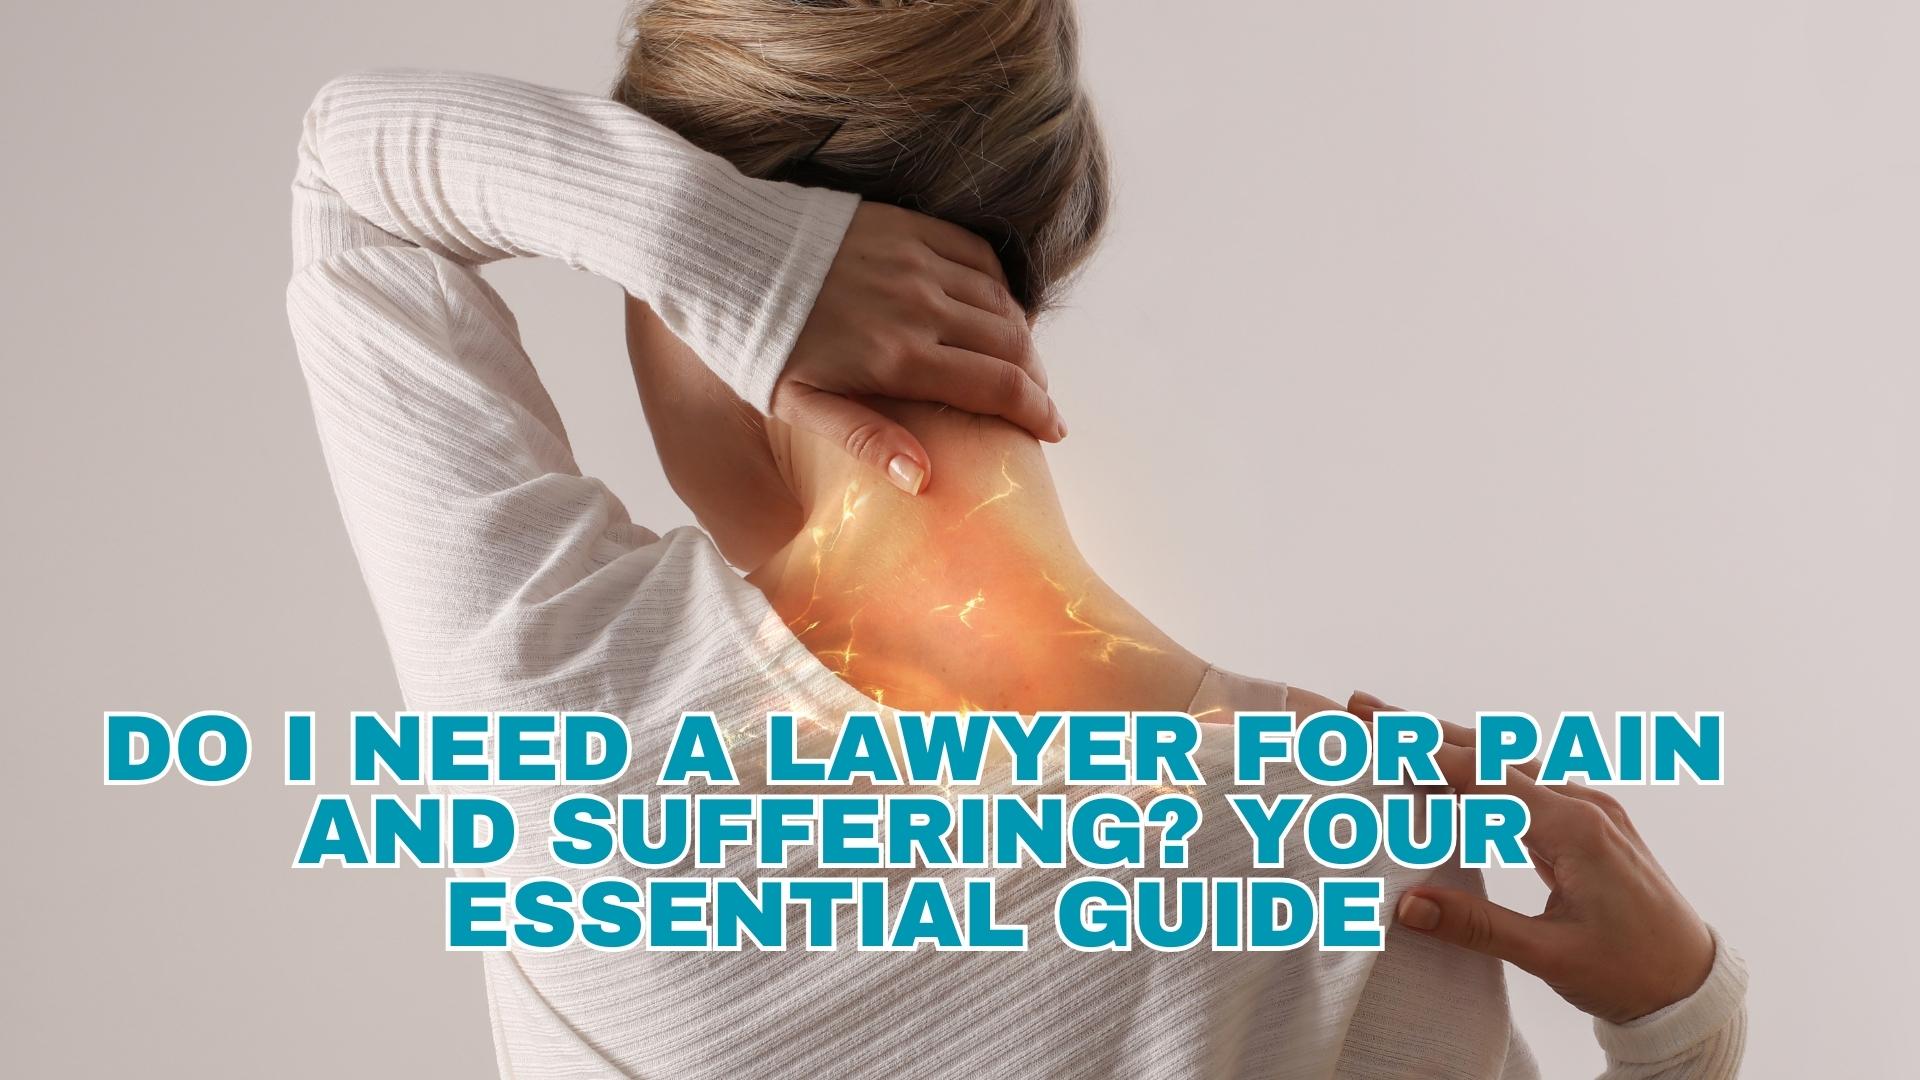 Do I Need a Lawyer for Pain and Suffering? Your Essential Guide